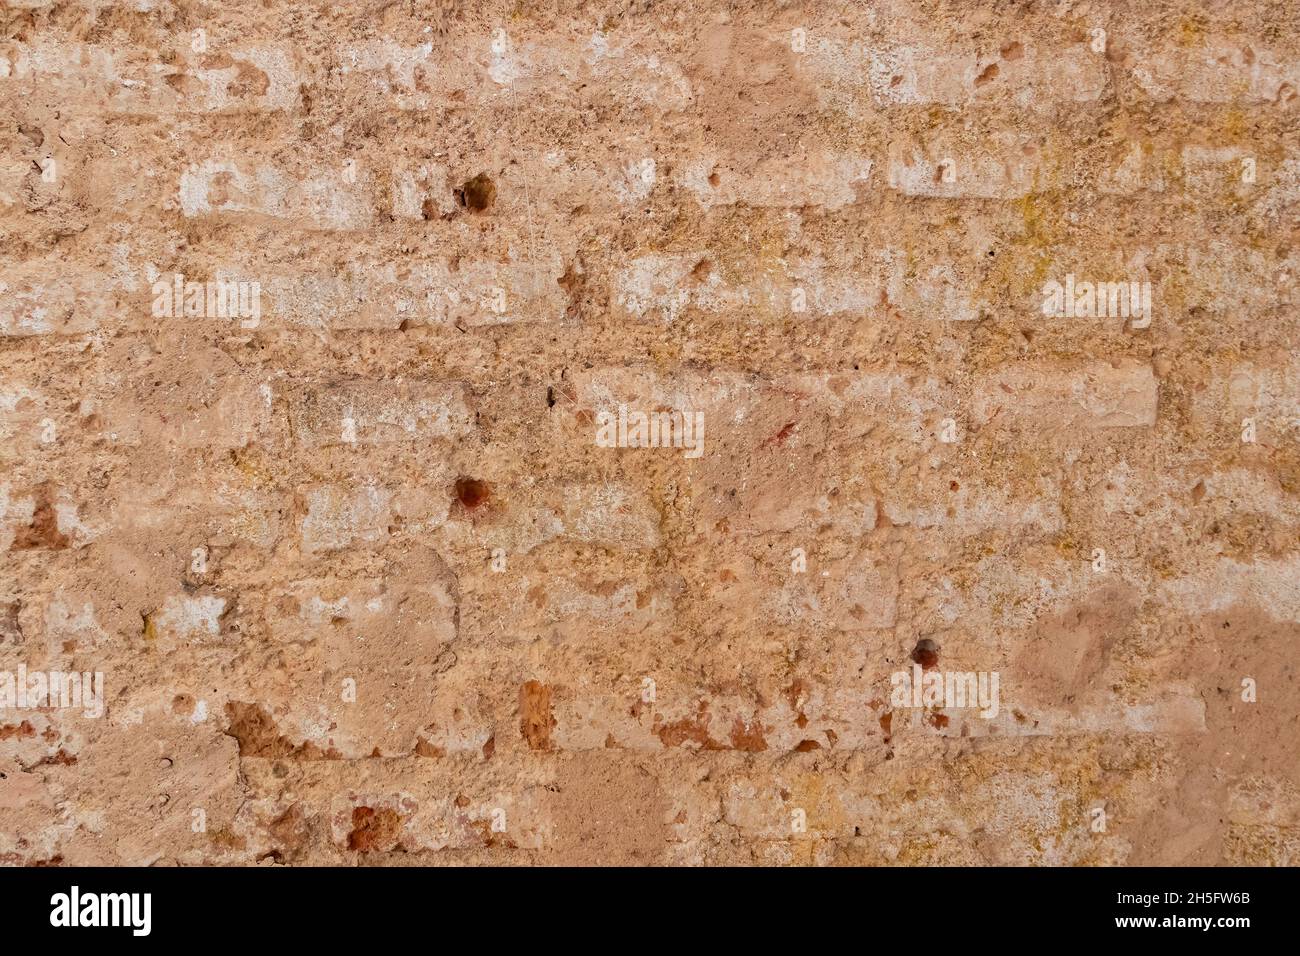 wall of executions by firing squad with bullet marks, used in spanish civil war Stock Photo